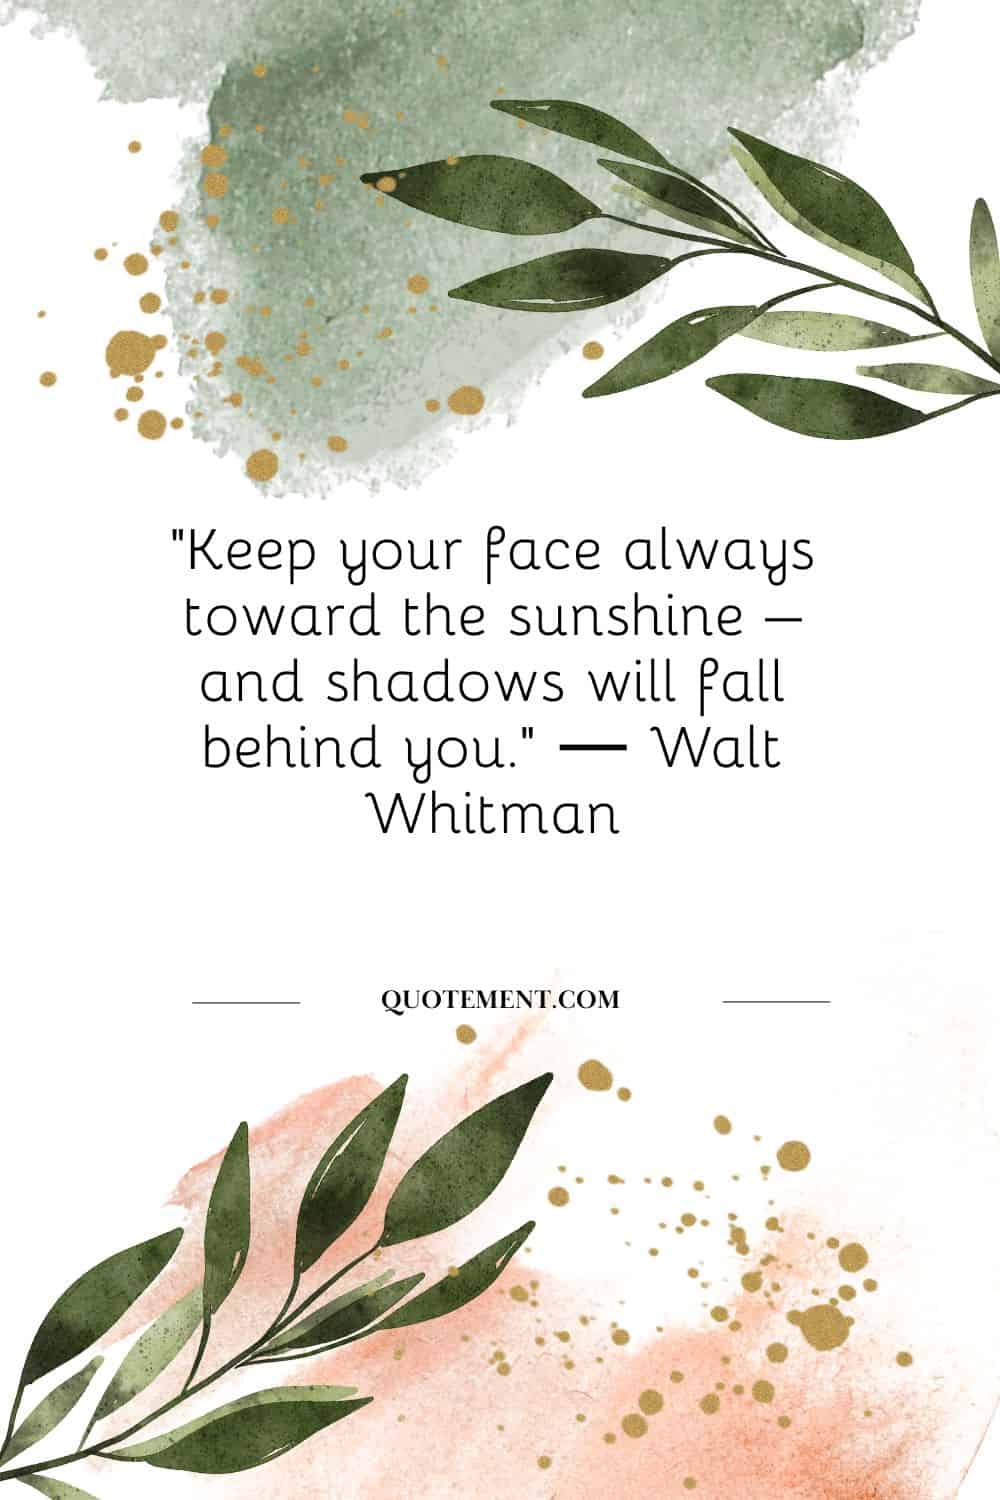 “Keep your face always toward the sunshine – and shadows will fall behind you.” ― Walt Whitman